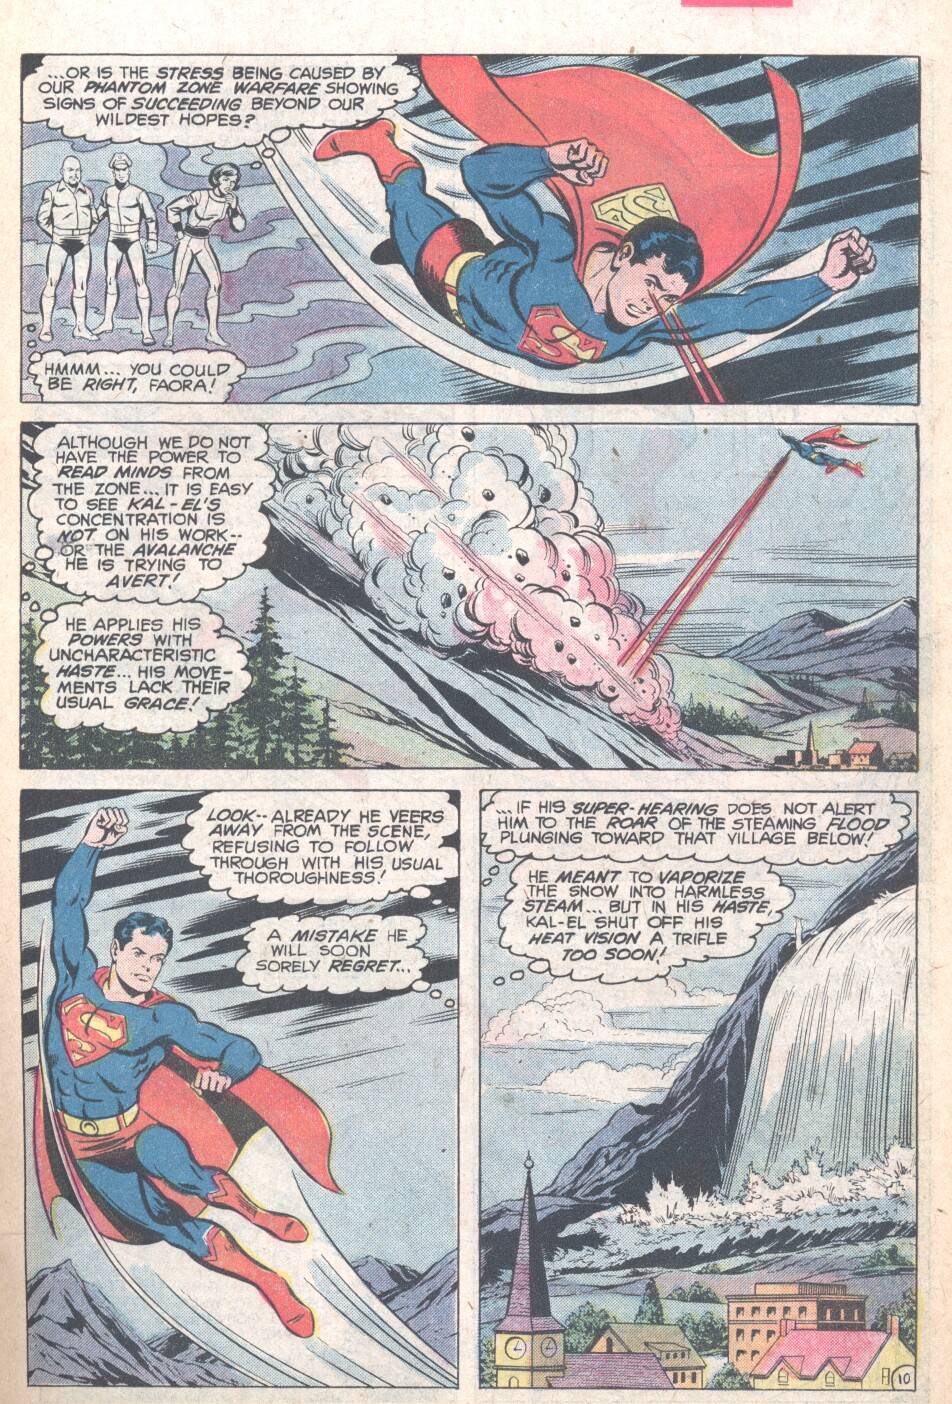 The New Adventures of Superboy 9 Page 10